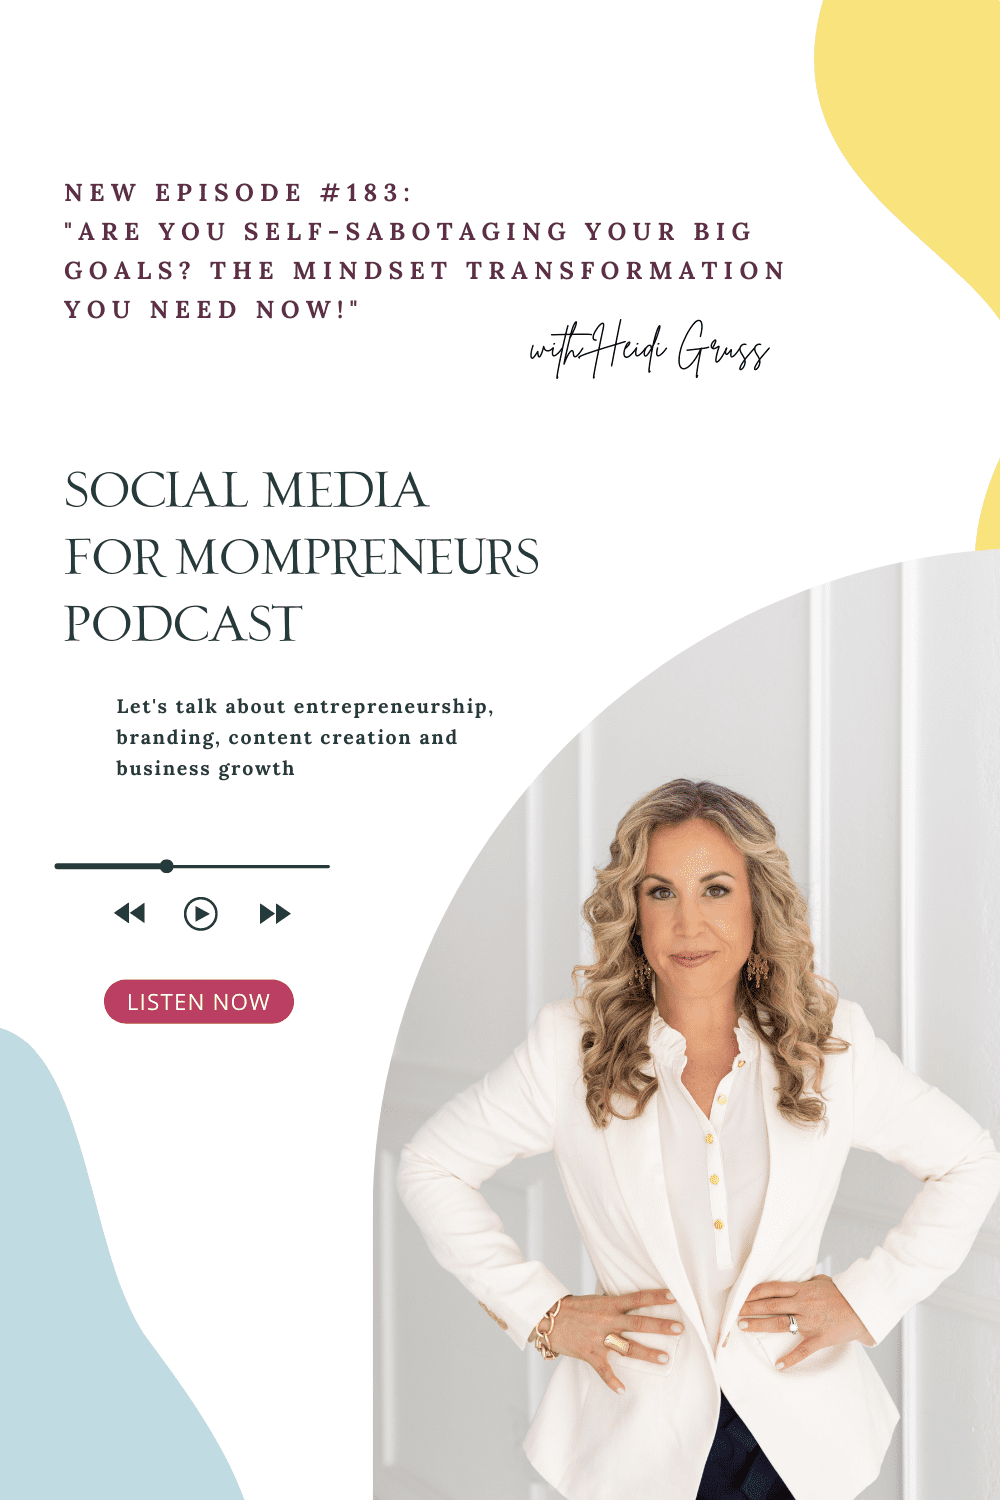 graphic with women | Social Media for Mompreneurs Podcast featuring Heidi Gruss | 5 Ways Your Negativity Leads To Self-Sabotage